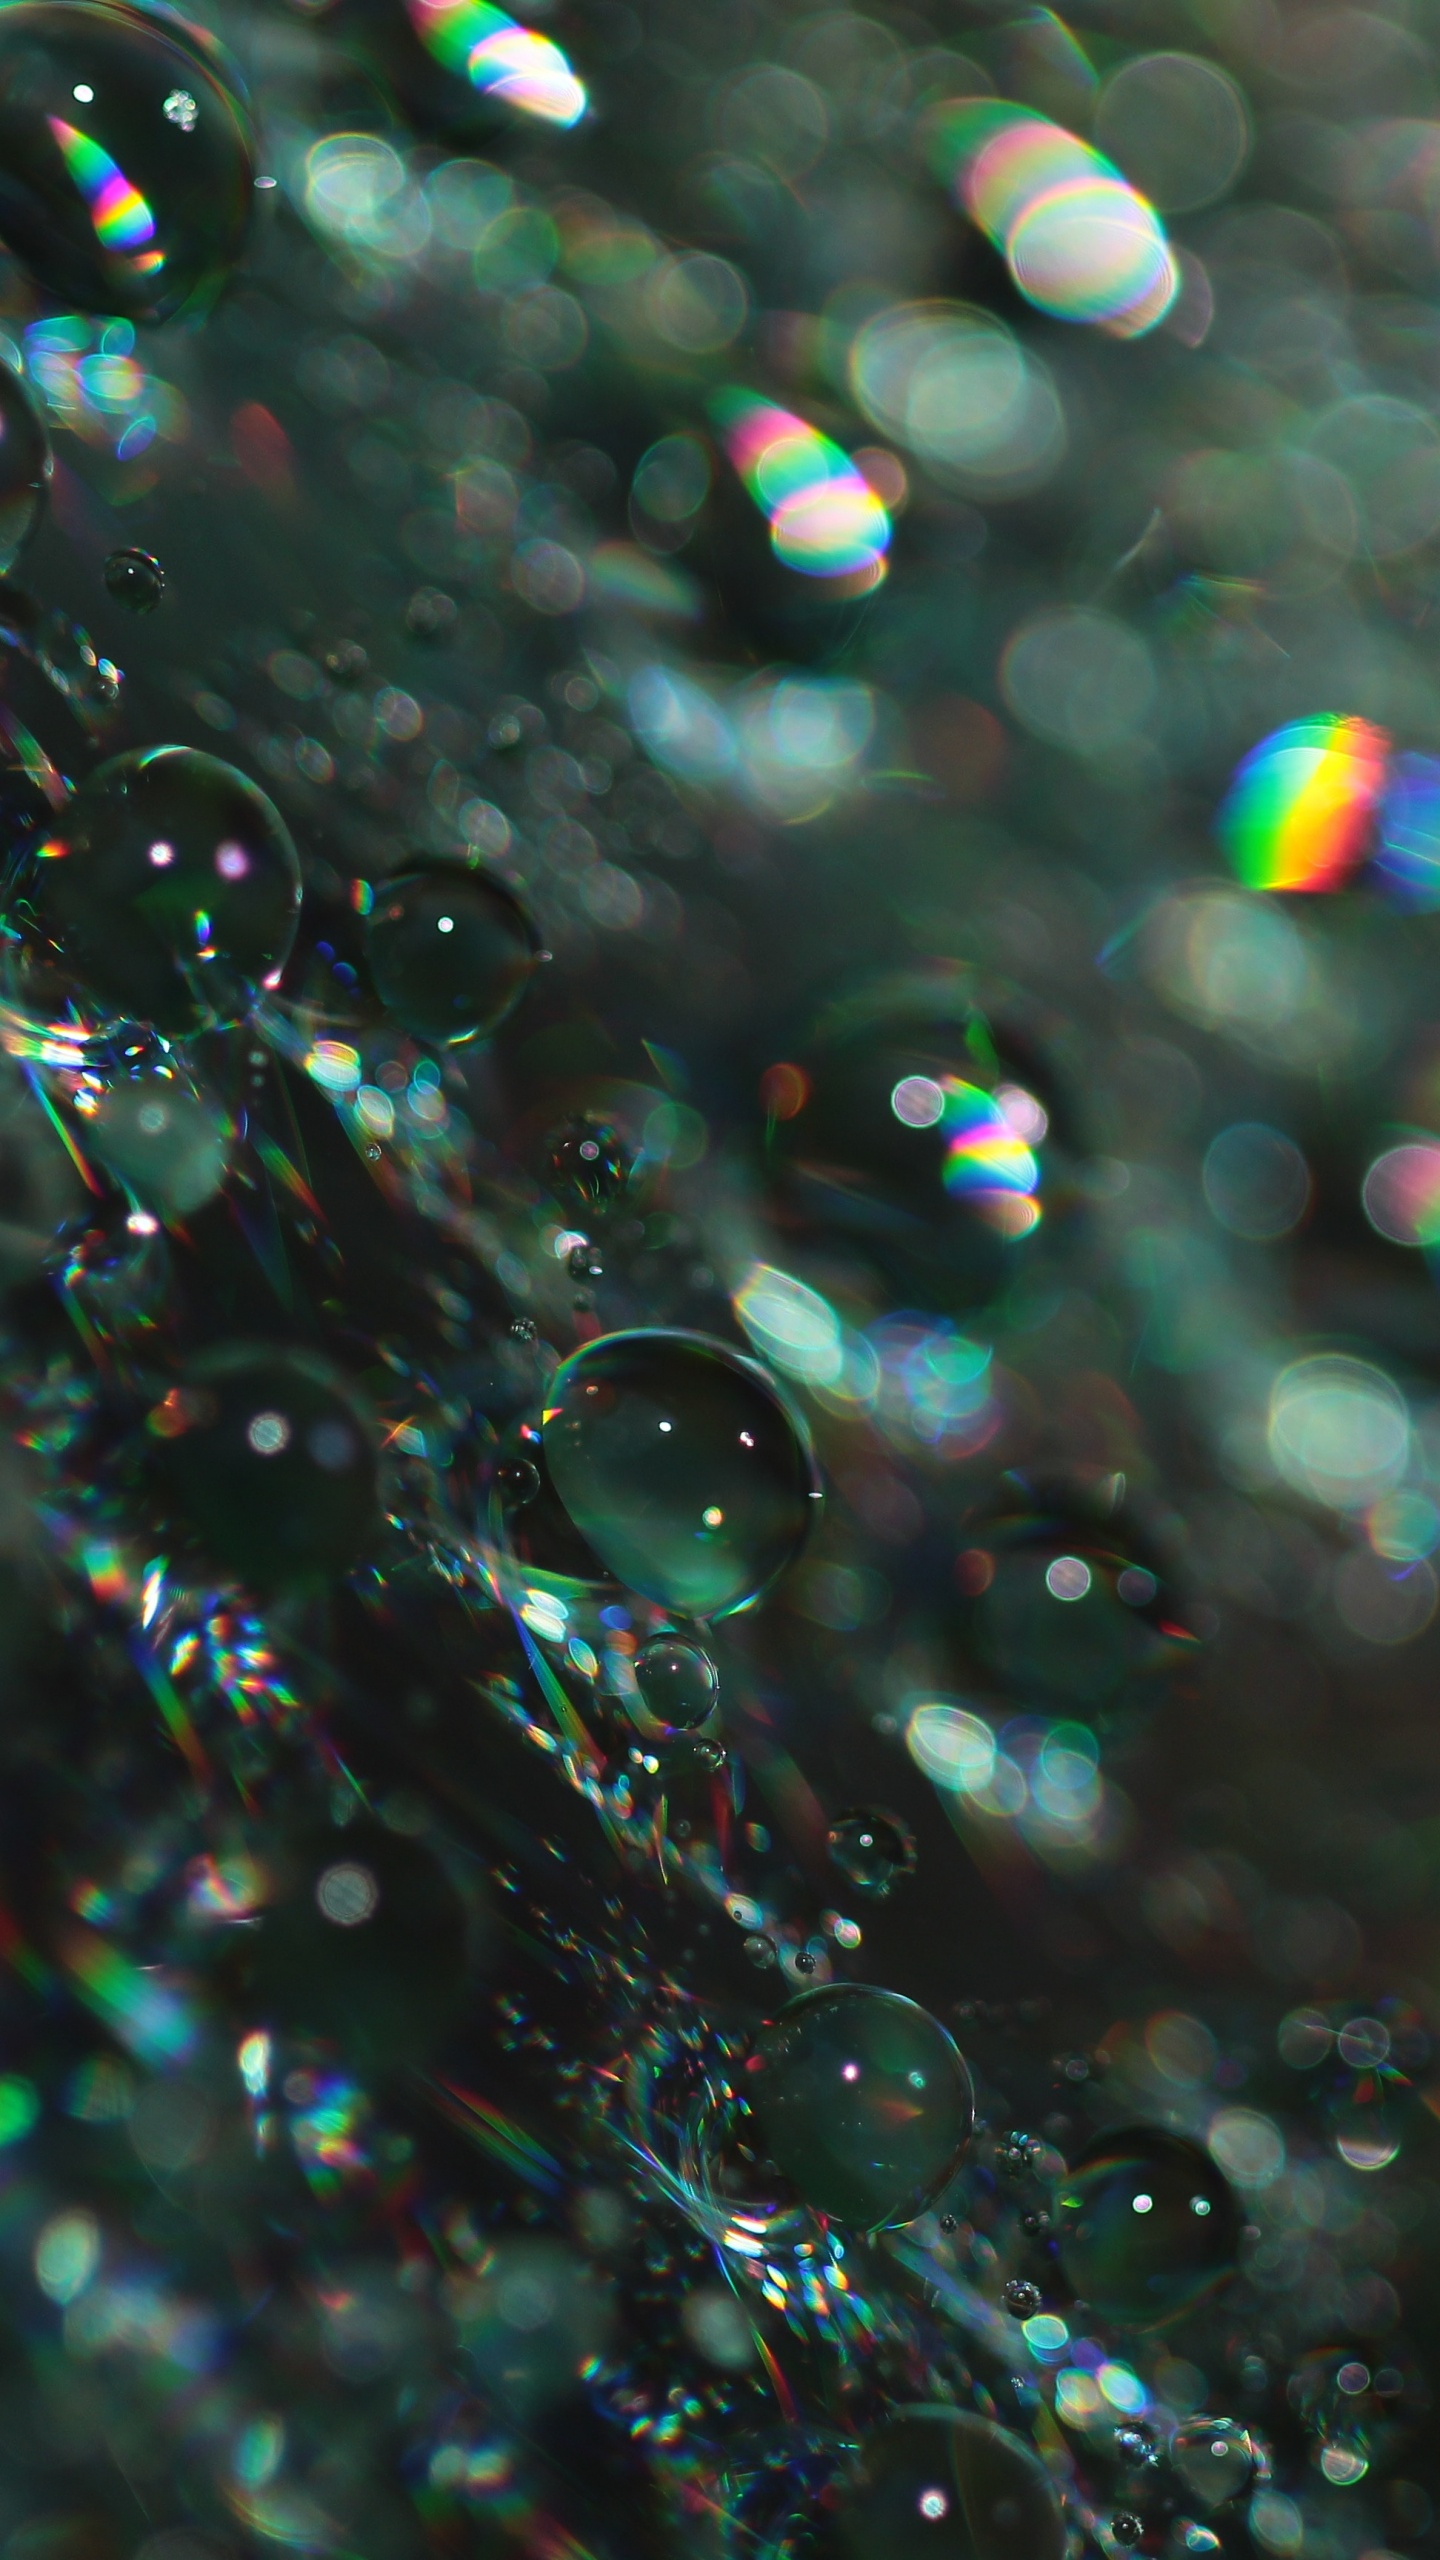 Water Droplets on Glass During Daytime. Wallpaper in 1440x2560 Resolution